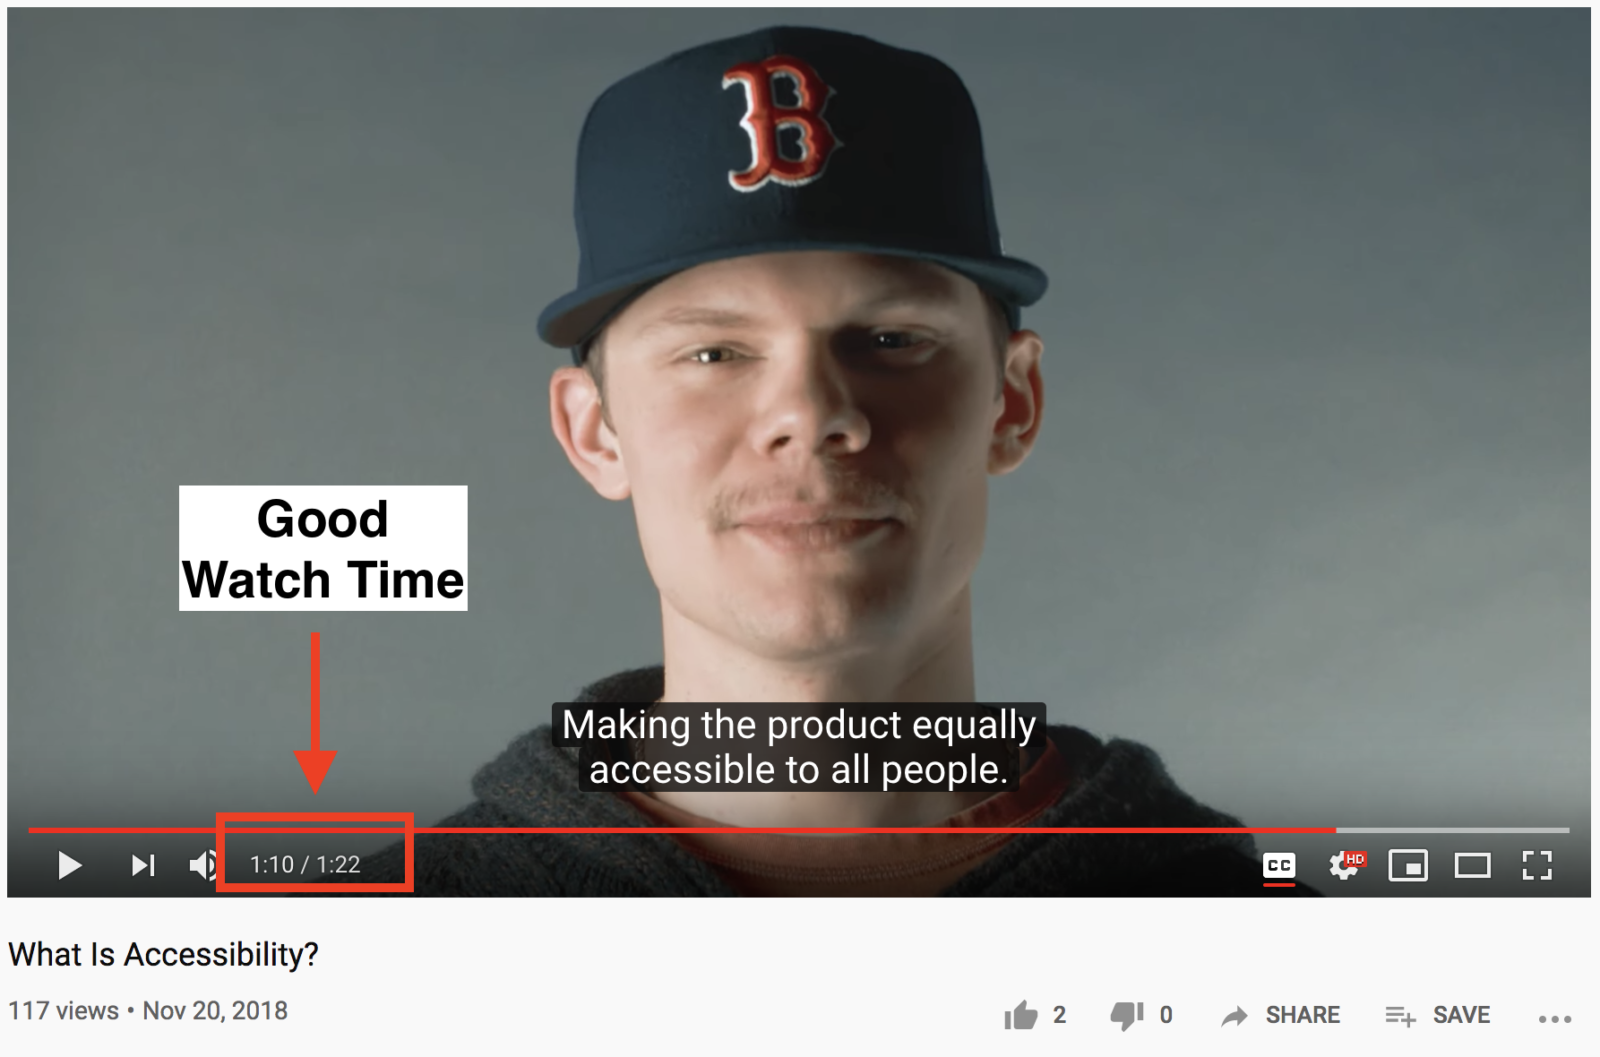 A screenshot of the "What Is Accessibility?" video by 3Play Media pointing out the watch time on the YouTube video player.